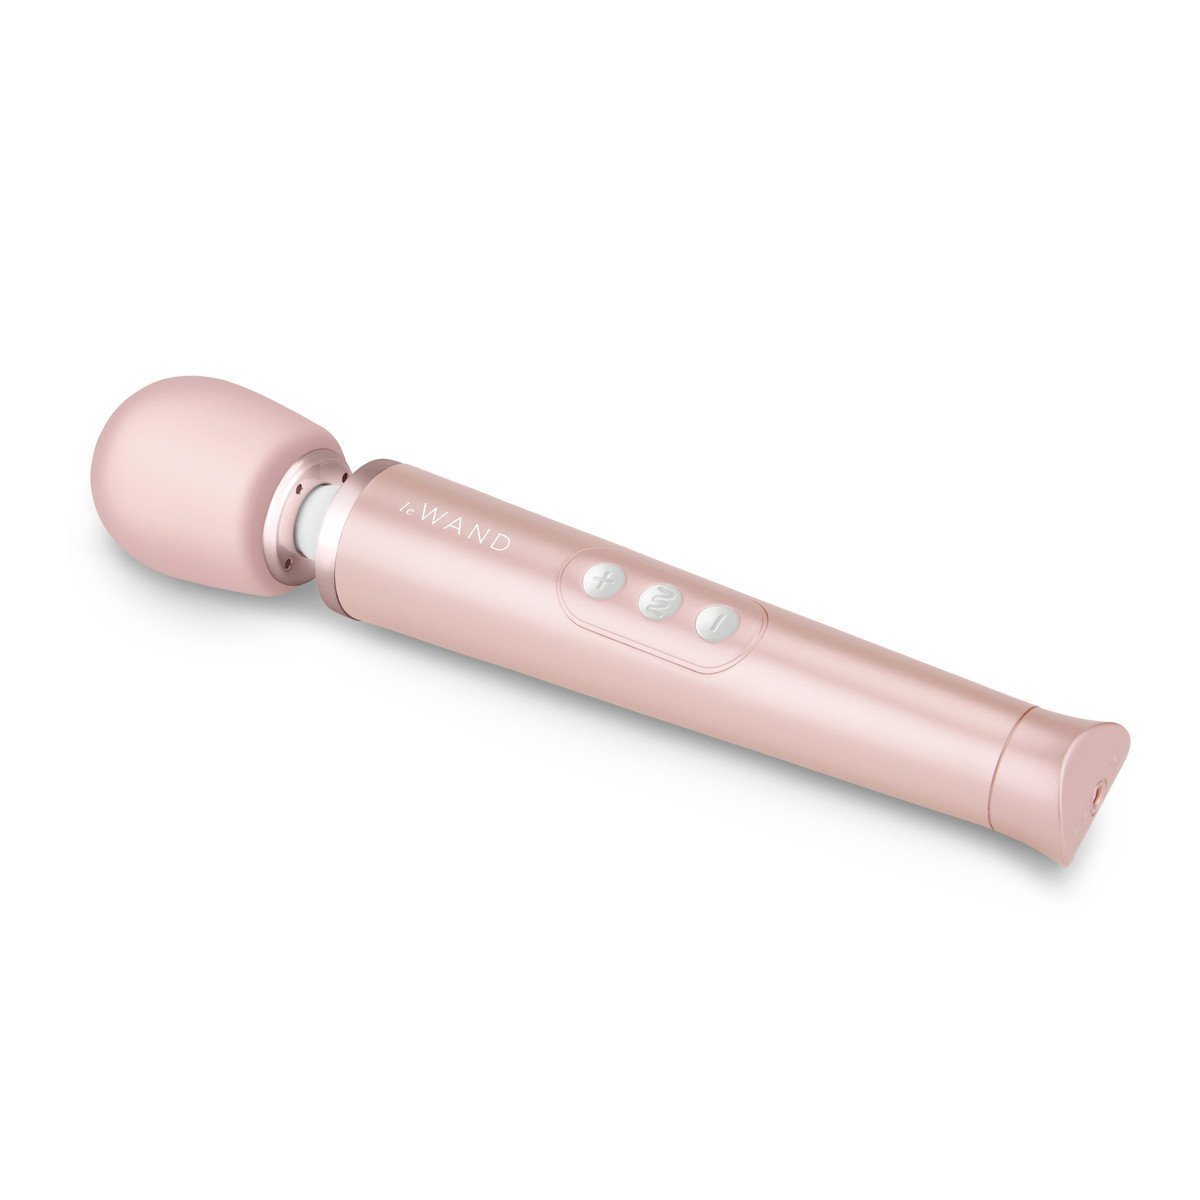 Rose gold Le Wand cordless rechargeable massager with soft silicone head Nudie Co